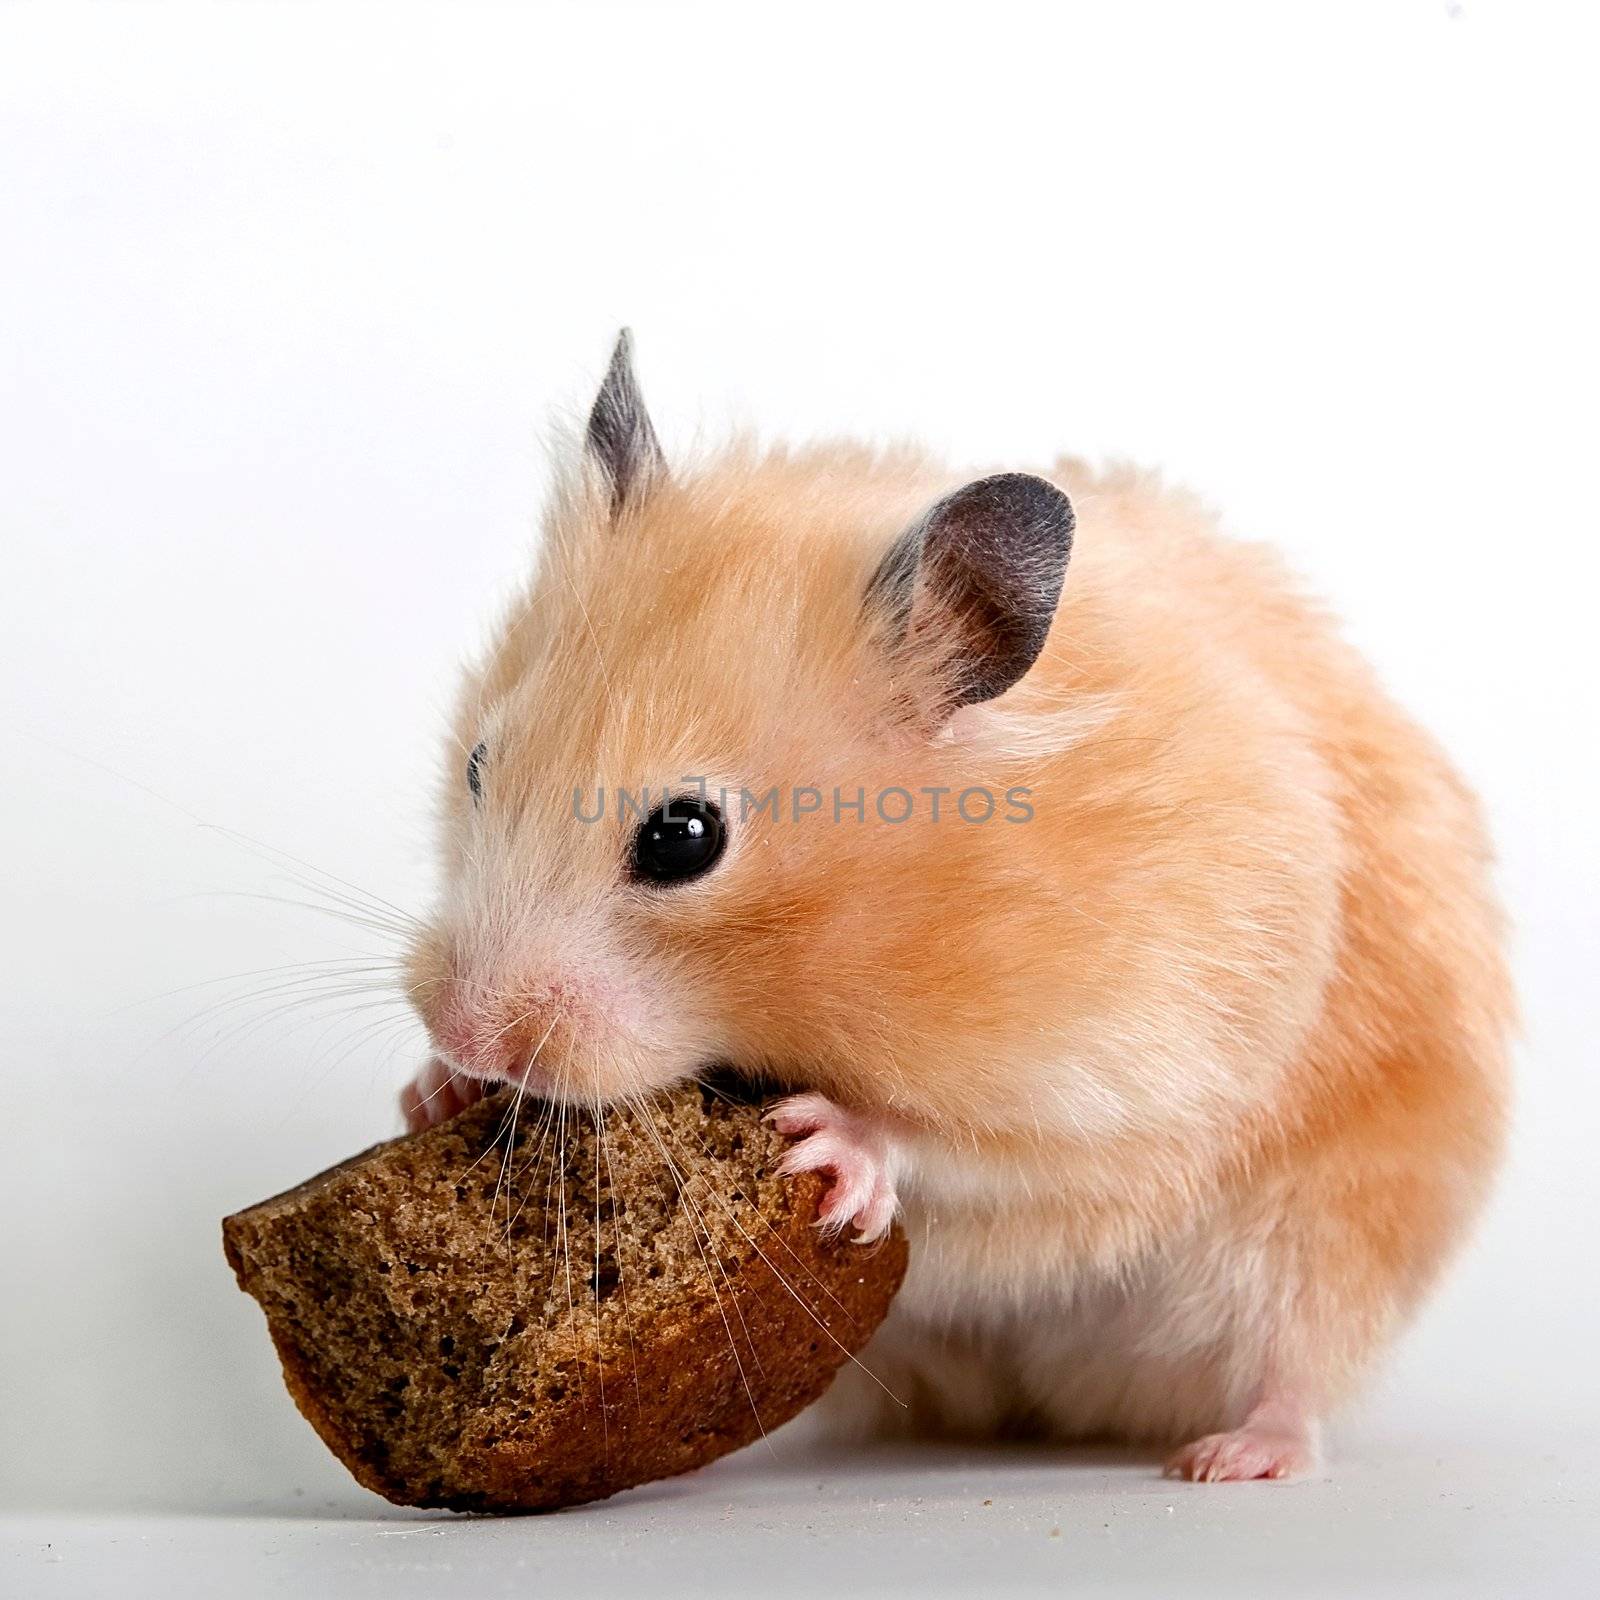 Hamster with a bread crust